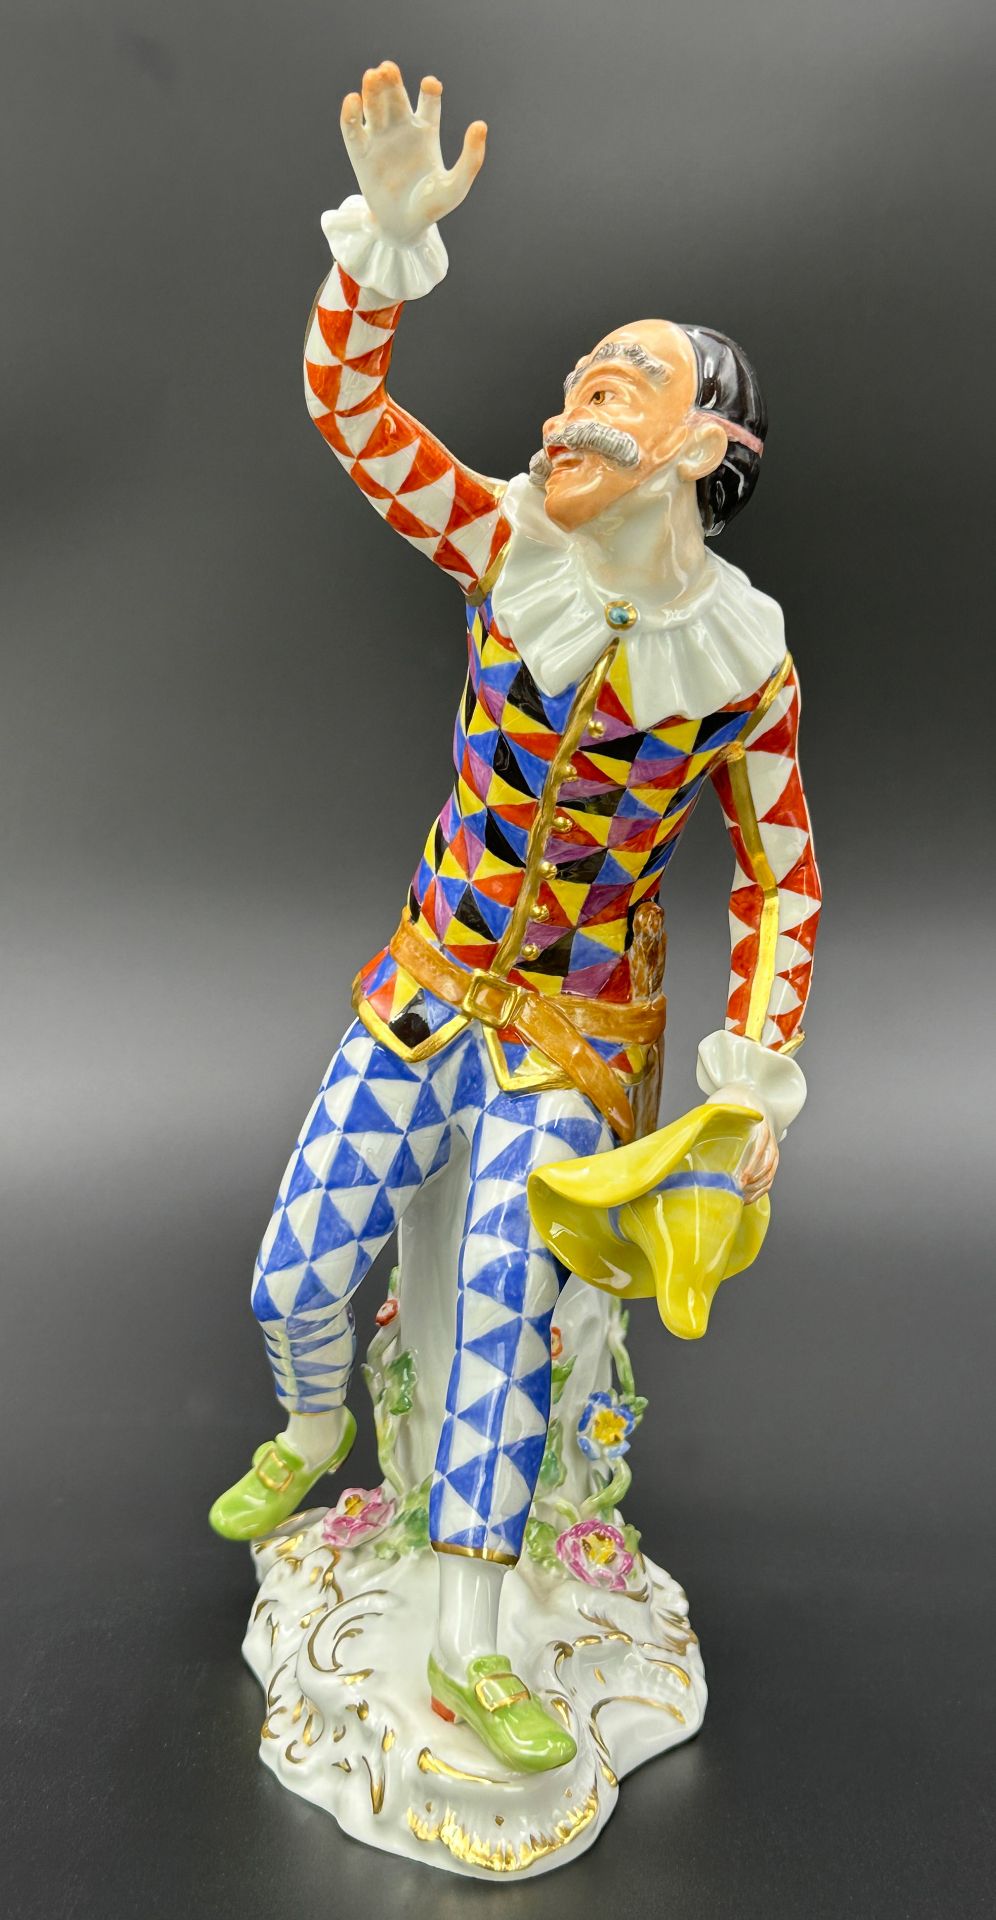 MEISSEN figure. Harlequin with hat. "Commedia dell' Arte". 1st choice. 20th century. - Image 5 of 11